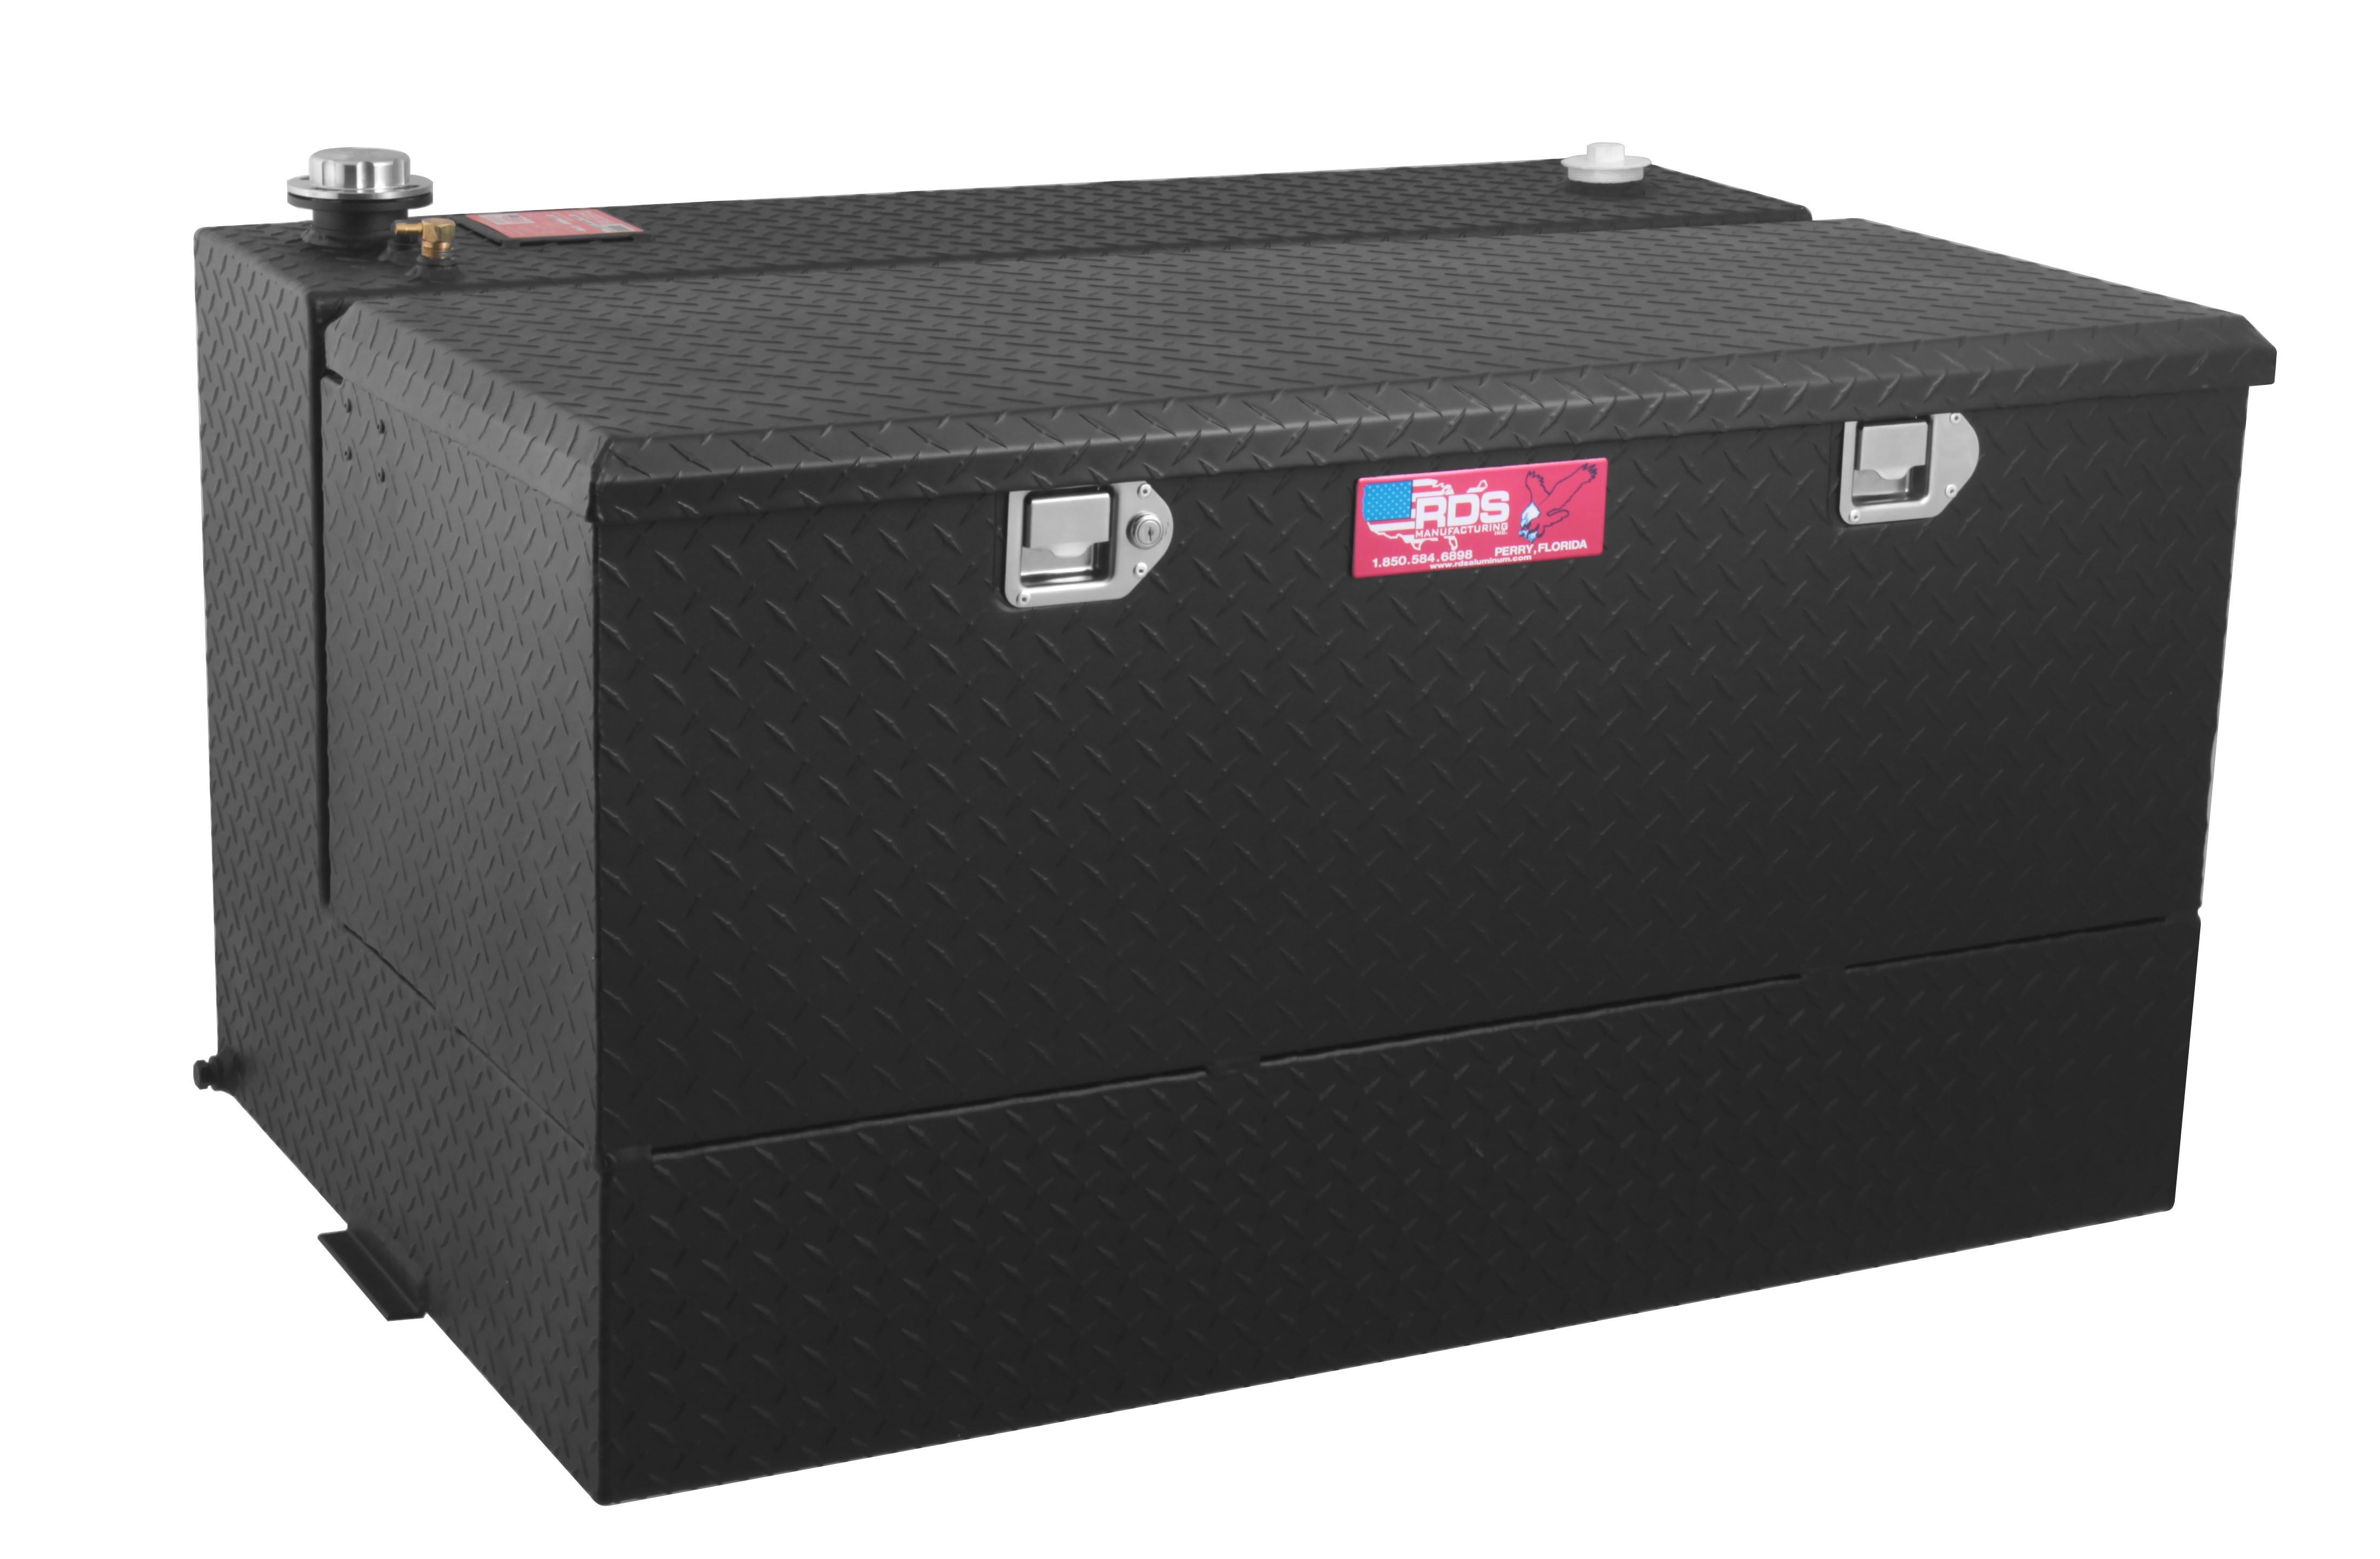 95 Gallon Aluminum Pick Up Truck Combo Toolbox and Auxiliary Fuel Tank